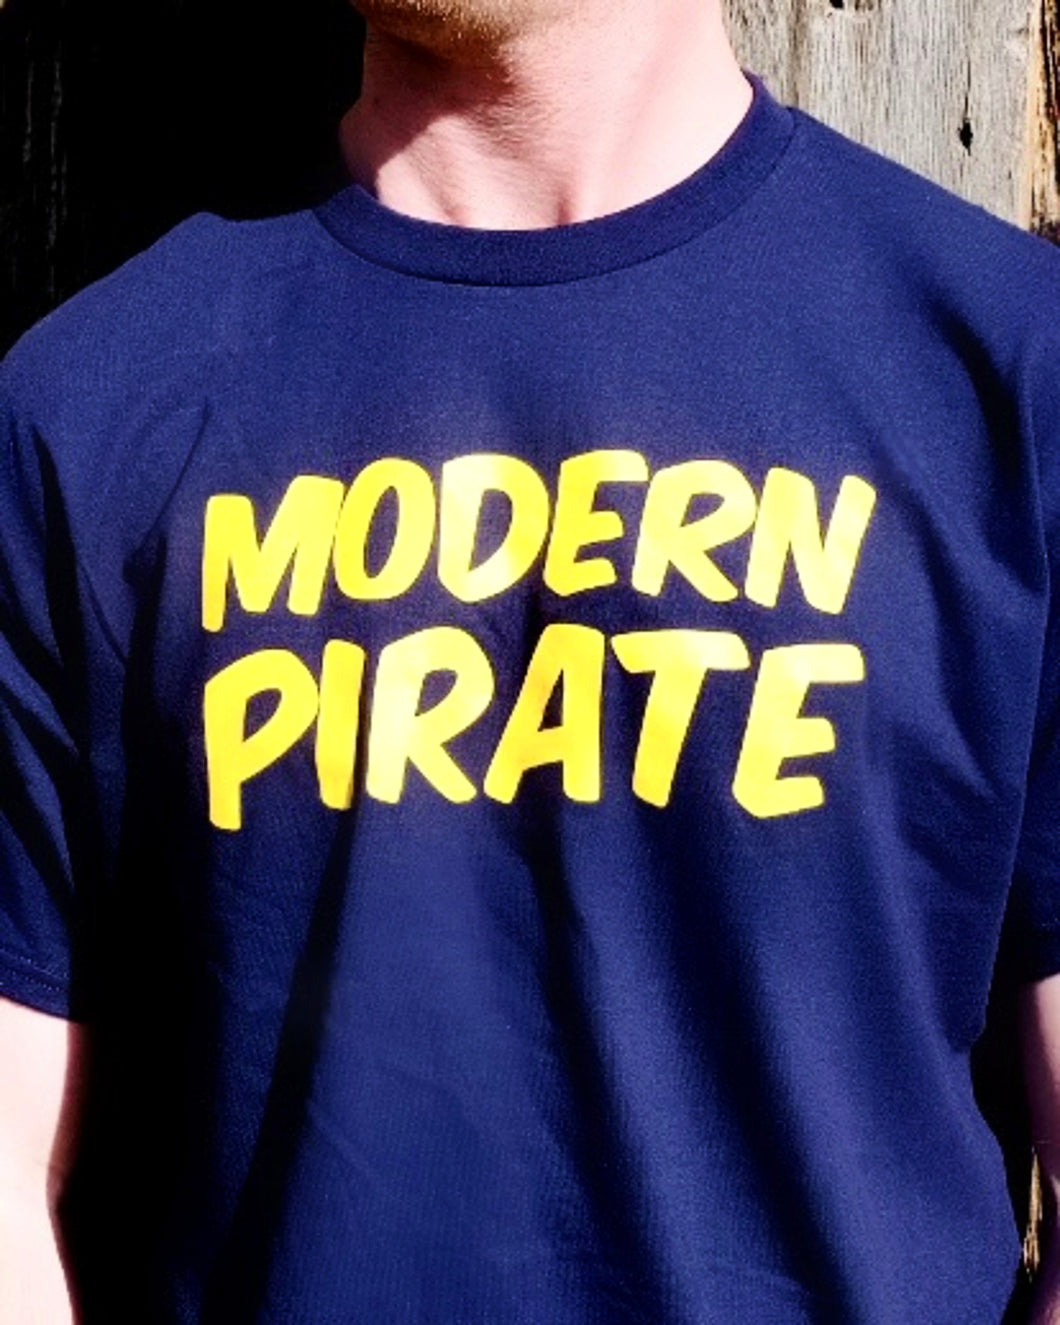 The Sea Serpent Blue Modern Pirate Original Tee is the tshirt for your modern pirate needs. modern pirate is your go to brand for artist needs and this sea serpent modern pirate tee will make your modern pirate life filled with booty! Modern pirate sea serpent blue original tee close up.